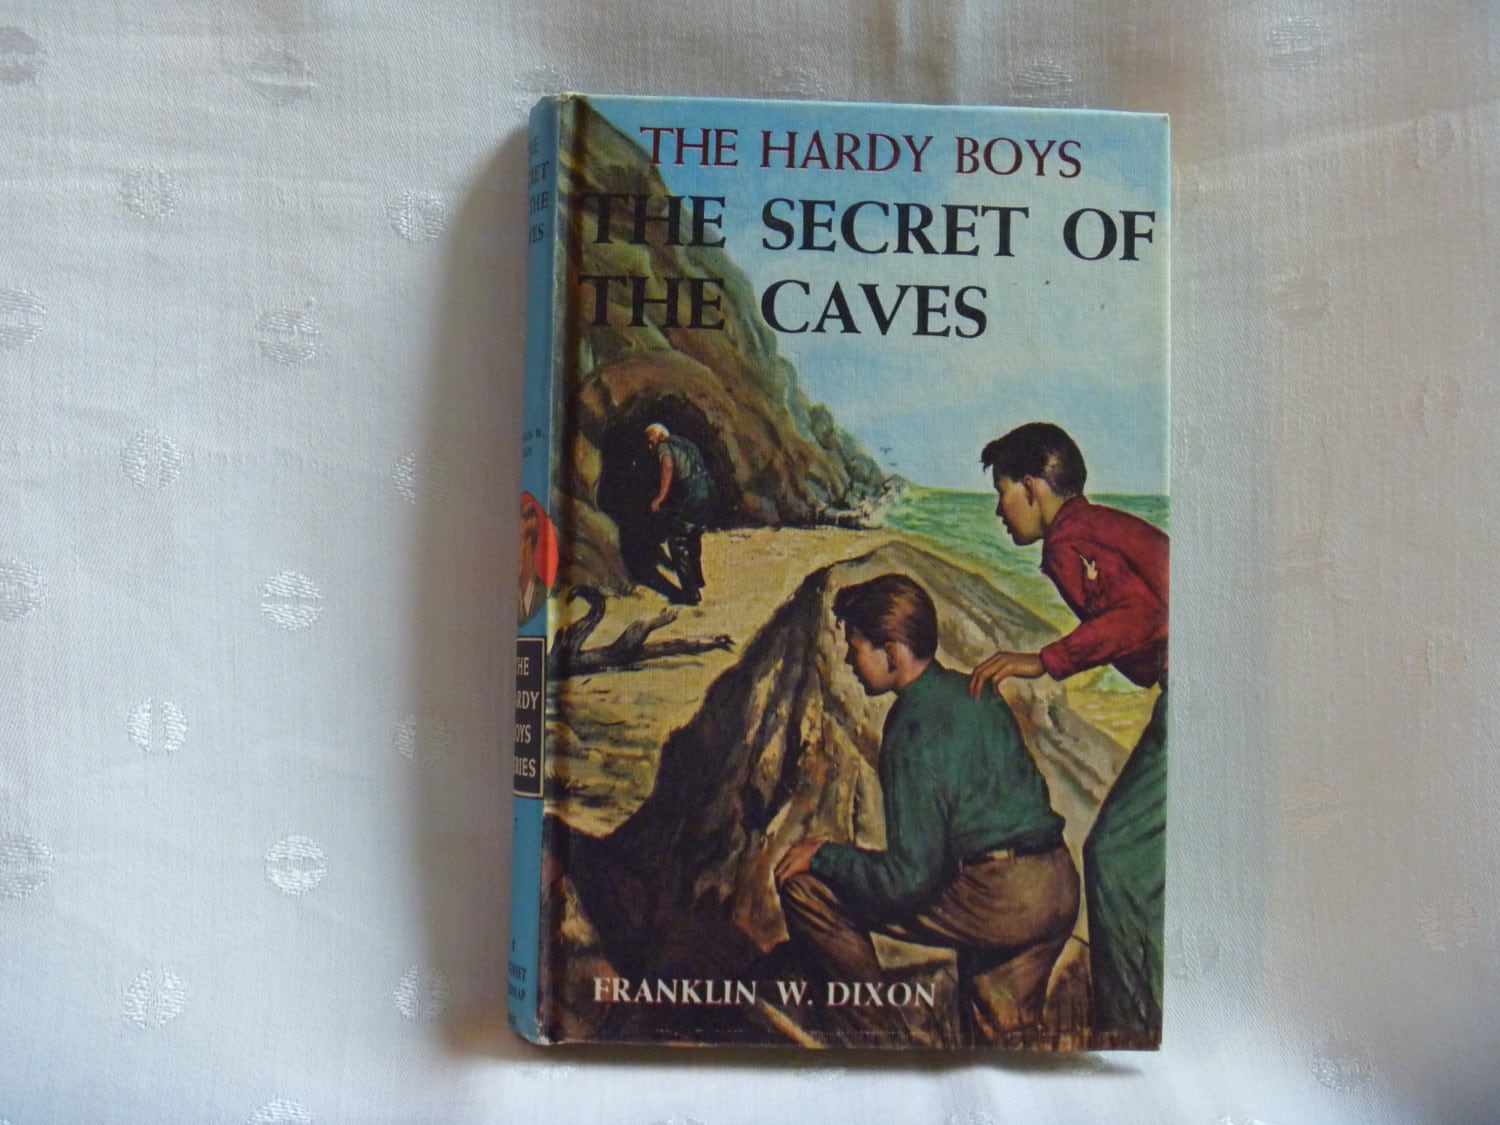 The Hardy Boys Mystery Book The Secret of the Caves 1964